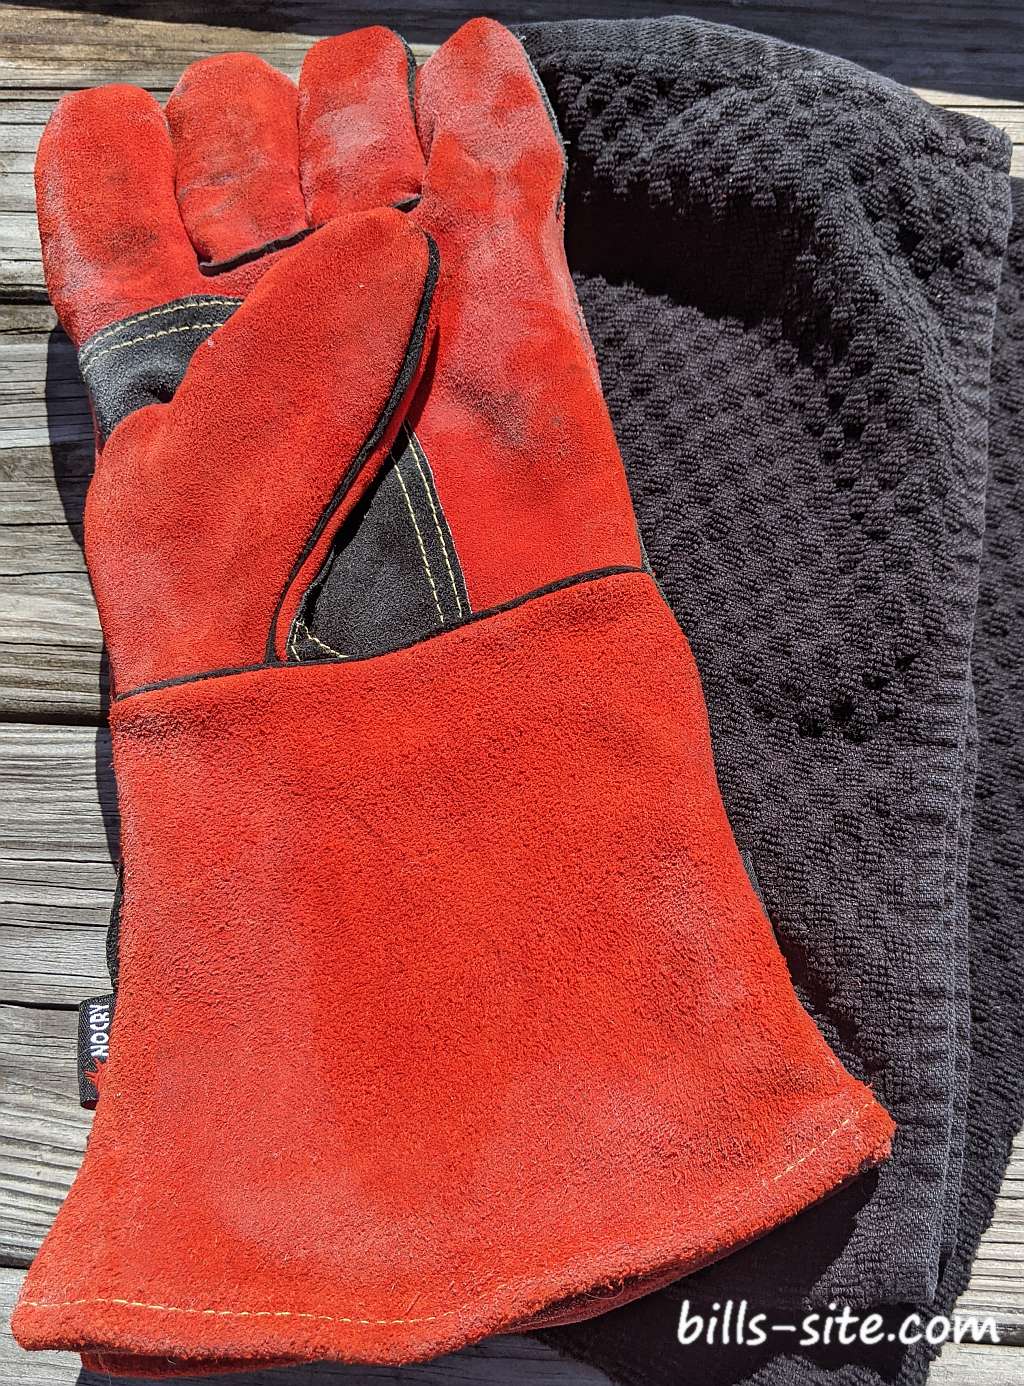 Heat resistant gloves and barbecue towel.